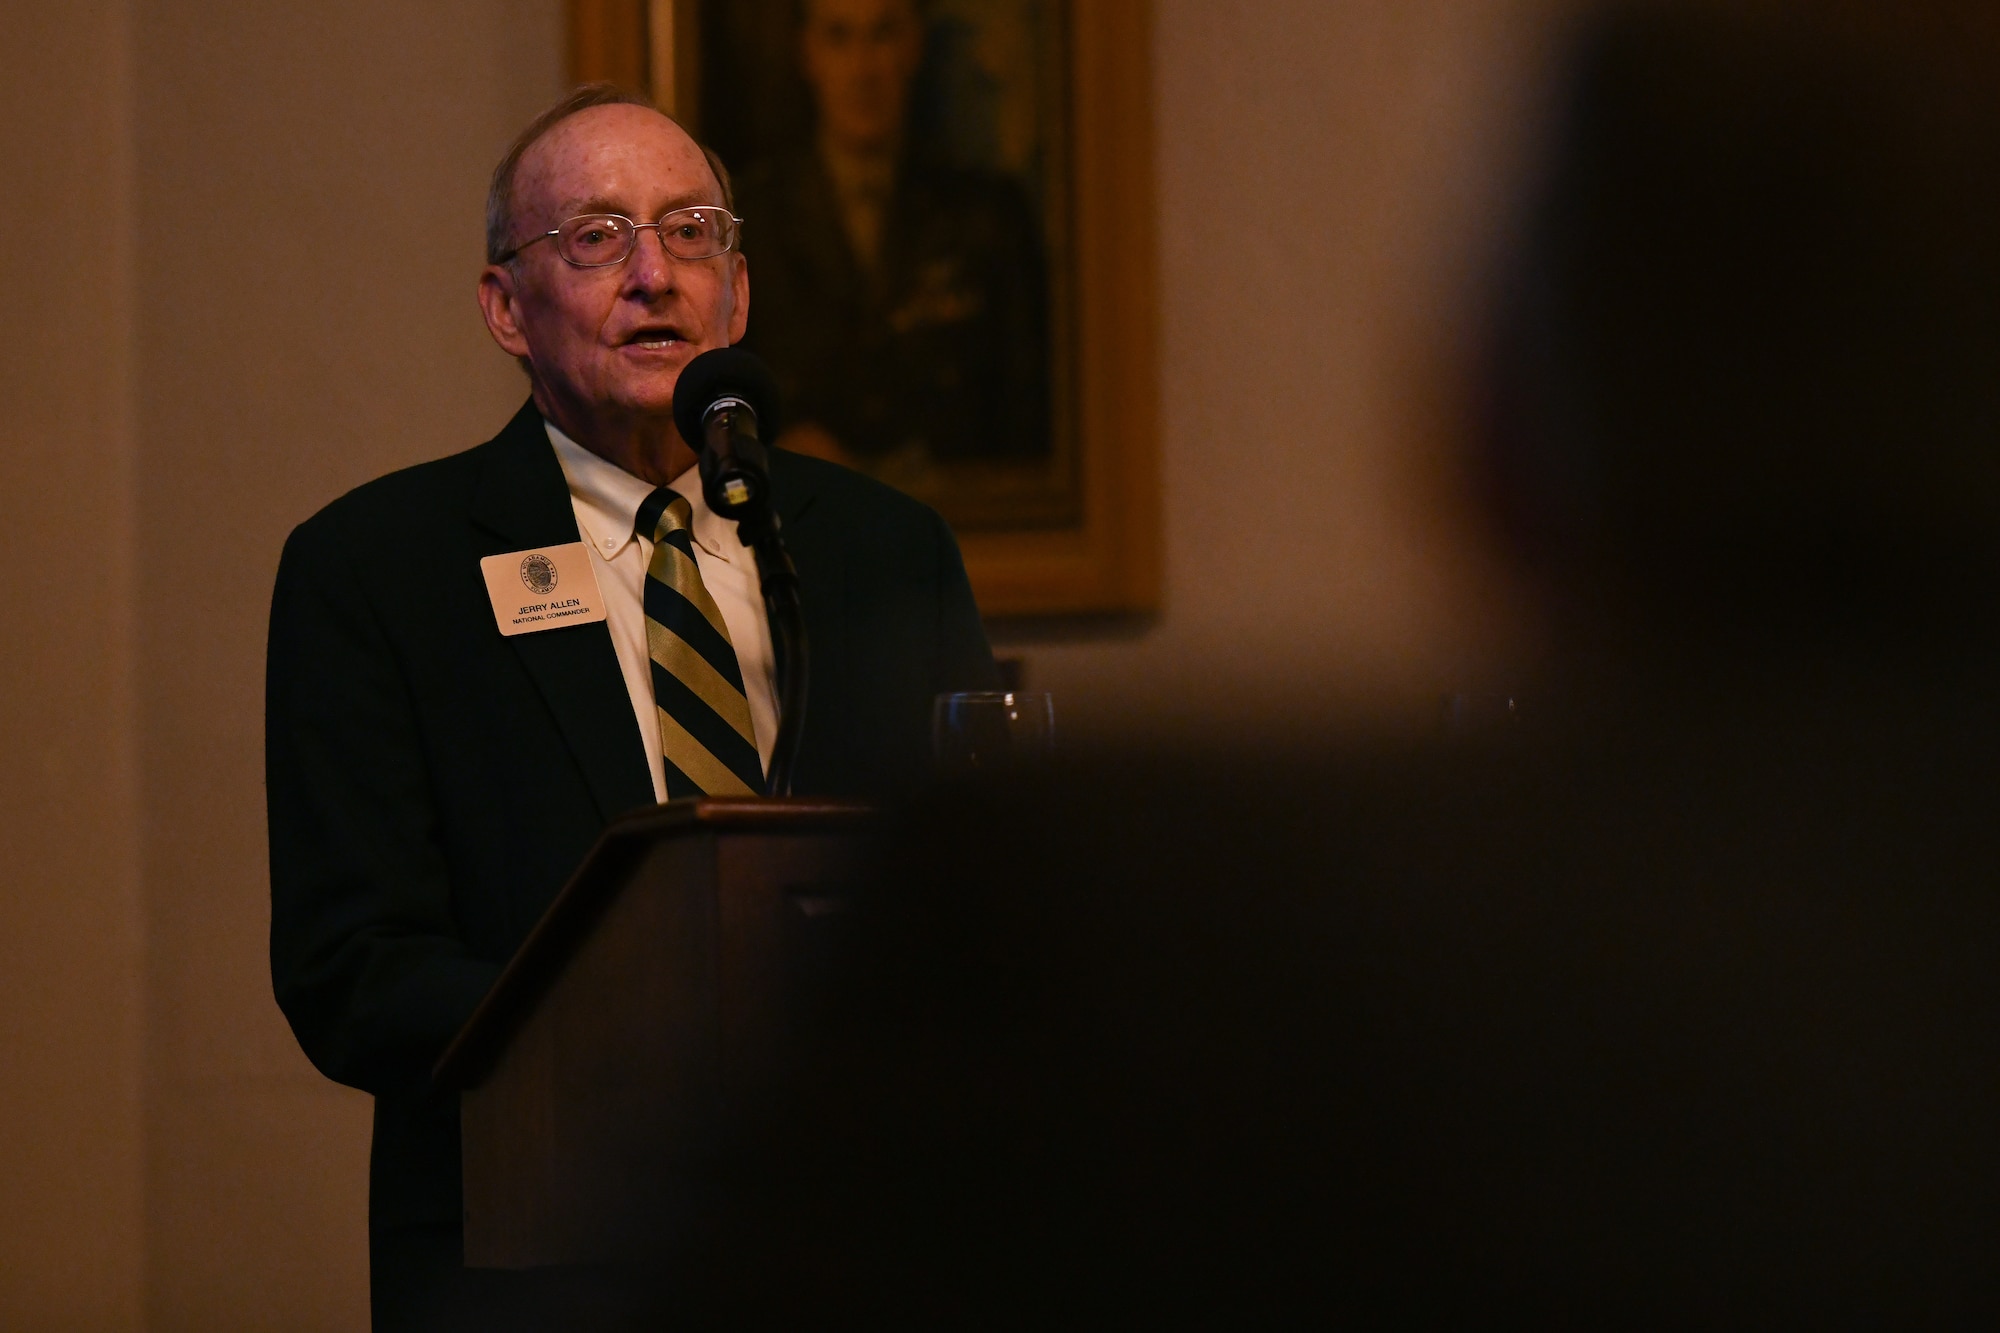 Retired Maj. Gen. Jerrold Allen, Daedalian national commander, delivers a speech during an event at the Maxwell Club on Maxwell Air Force Base, Alabama, July 22, 2021. The event was held to honor James “Jimmy” Stewart’s military service as an aviator and recognize him as a Daedalian Distinguished Colleague.